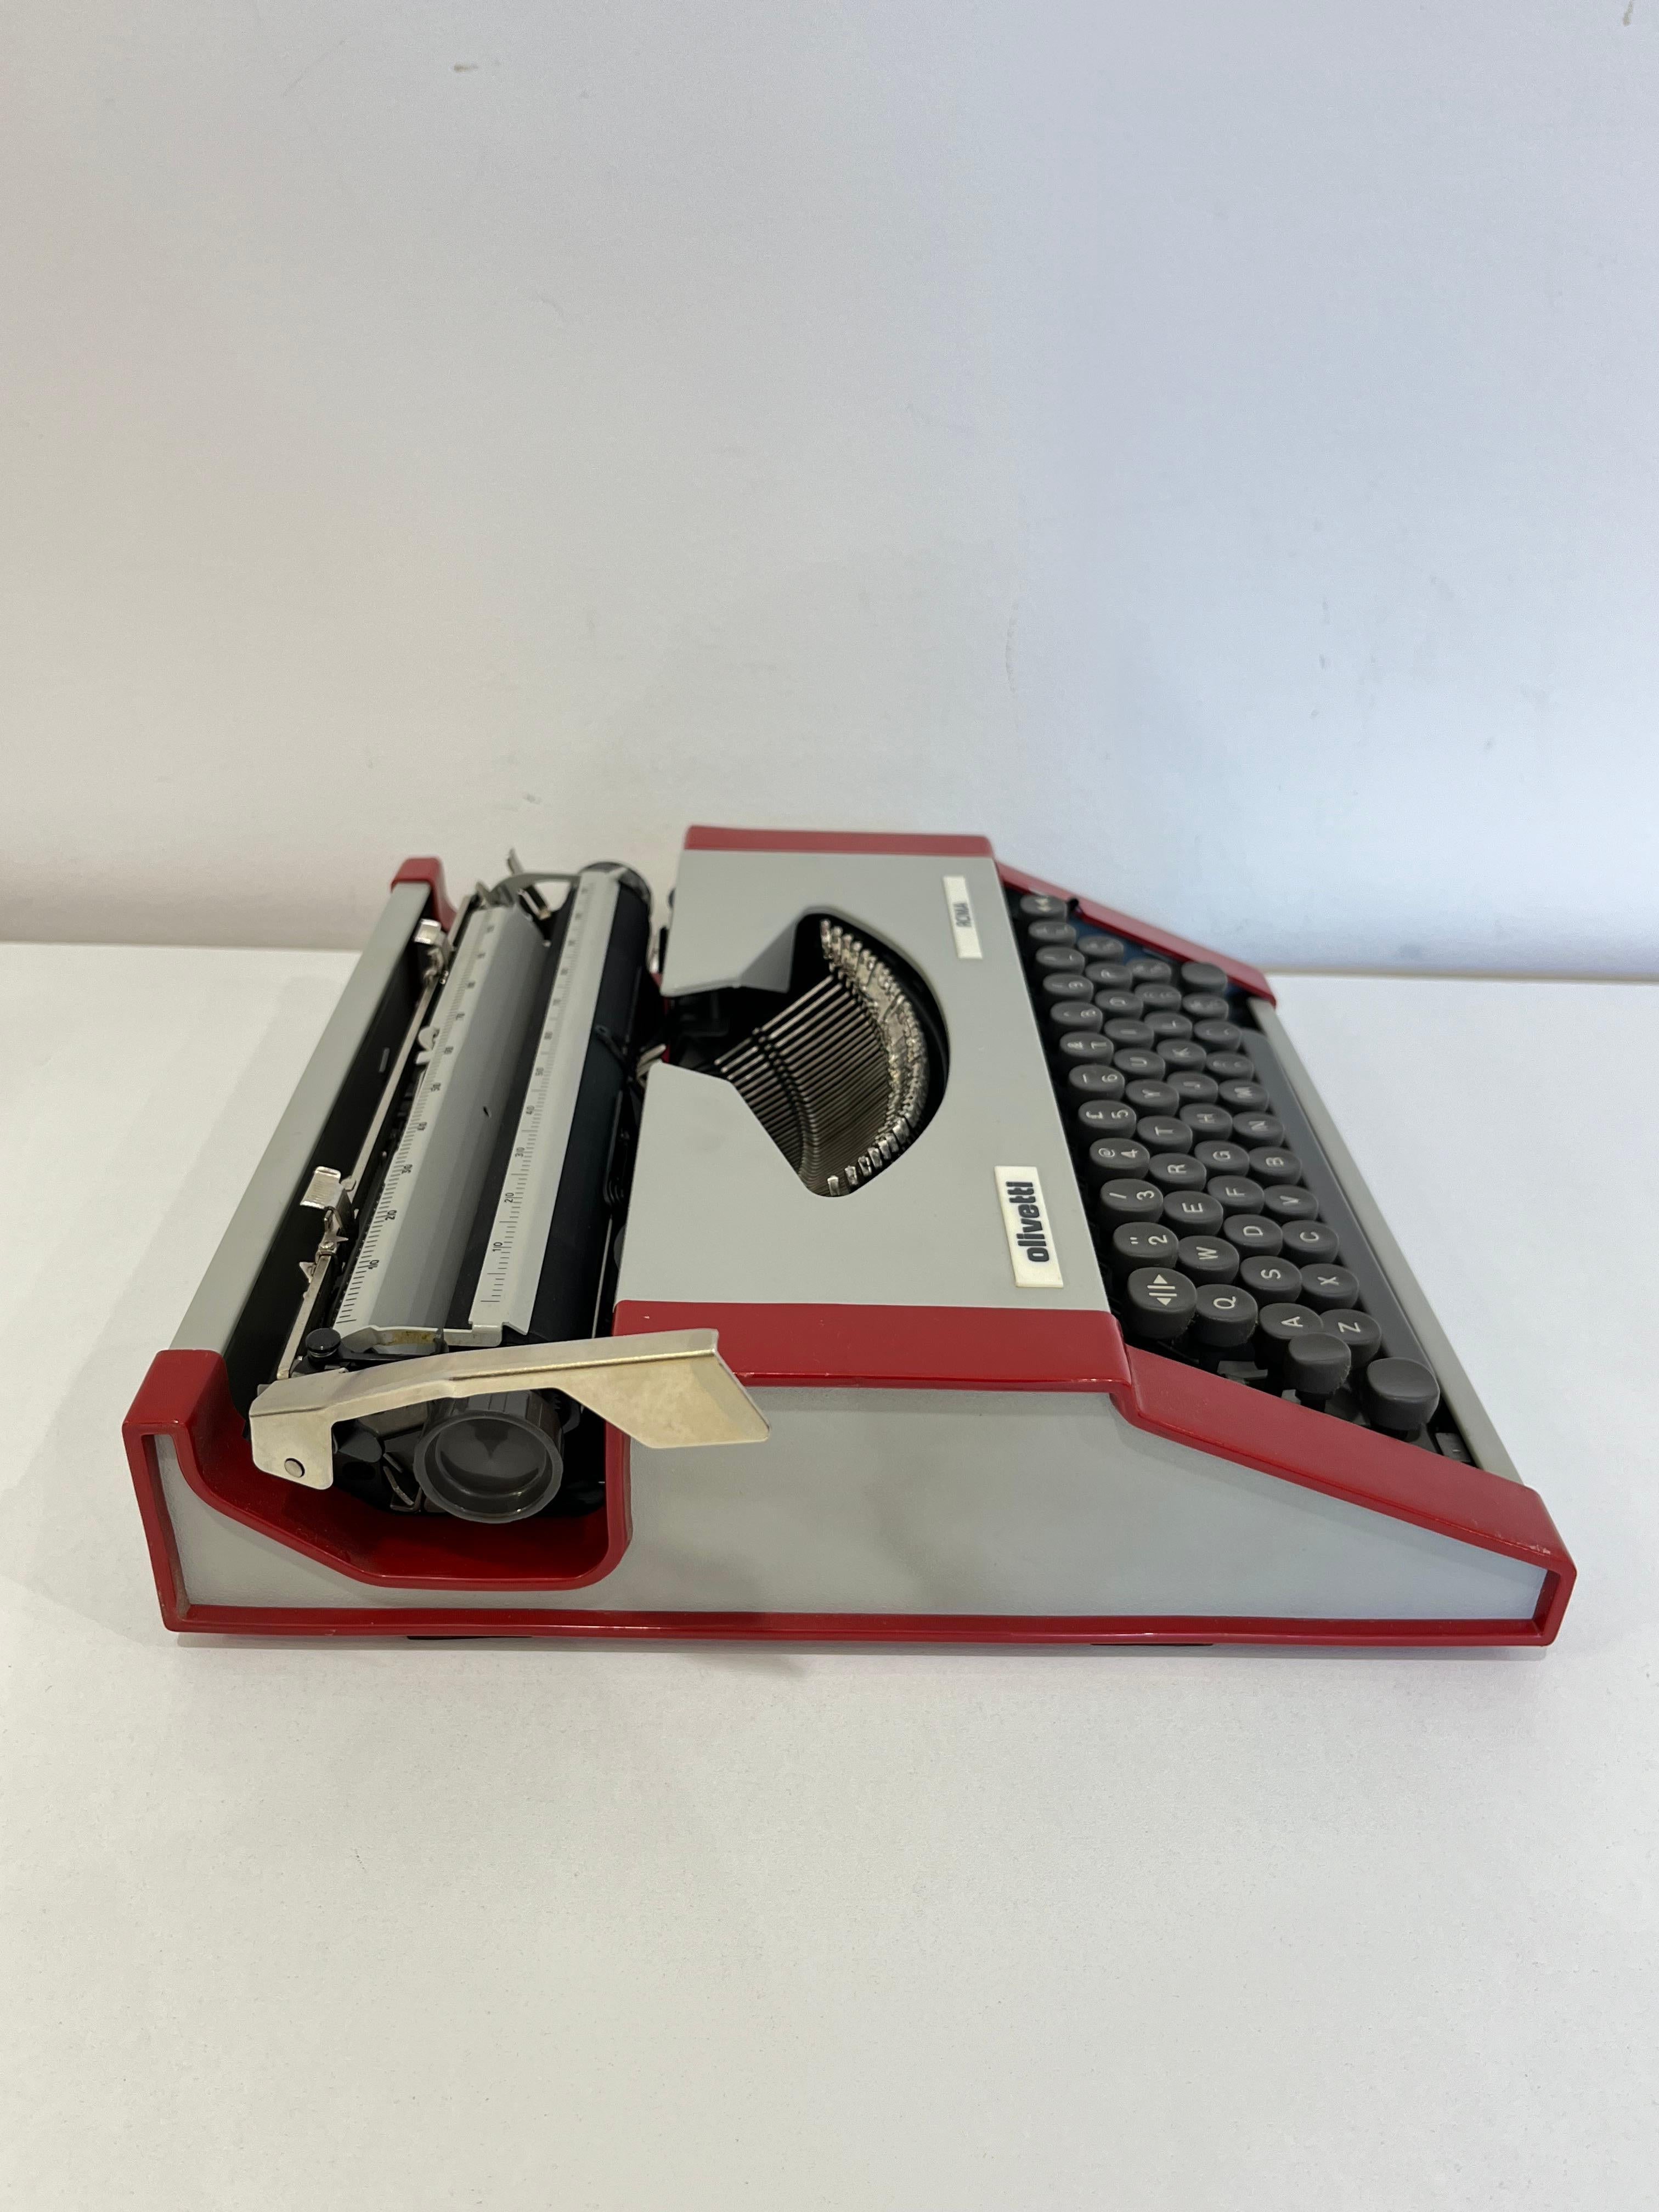 Vintage Olivetti Portable Typewriter Model Roma 1984 In Good Condition For Sale In Palermo, IT